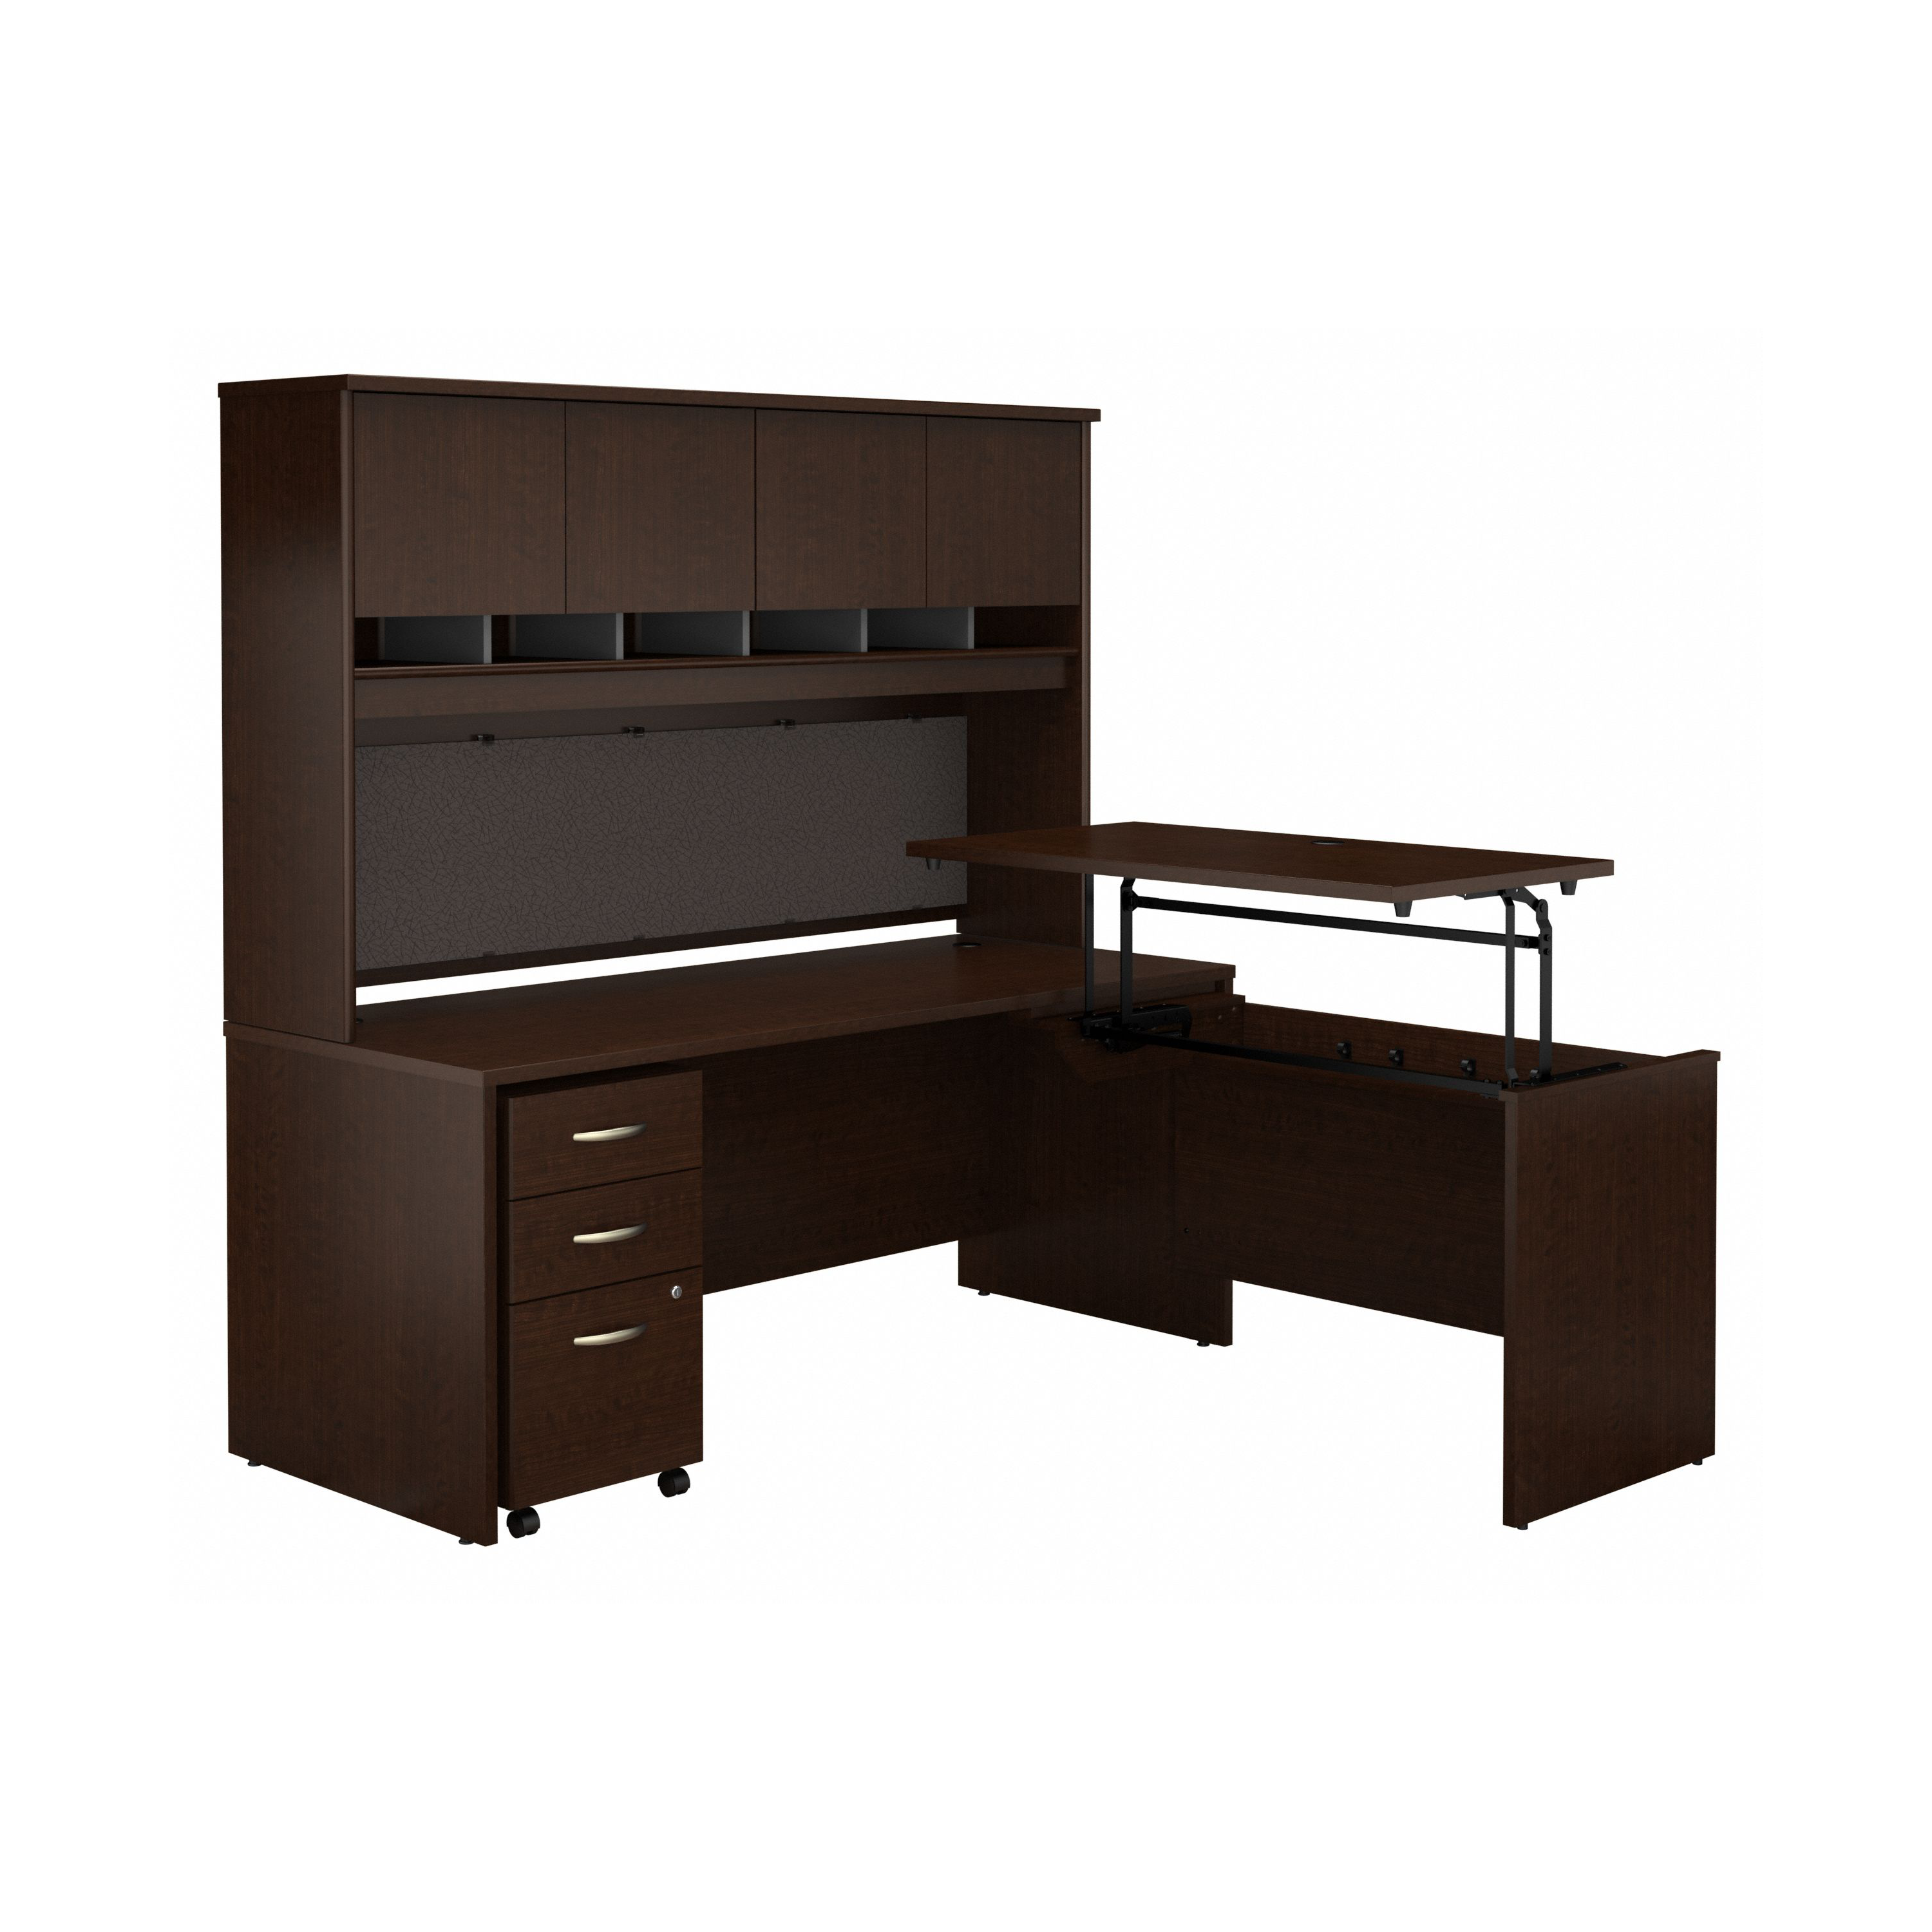 Shop Bush Business Furniture Series C 72W x 30D 3 Position Sit to Stand L Shaped Desk with Hutch and Mobile File Cabinet 02 SRC124MRSU #color_mocha cherry